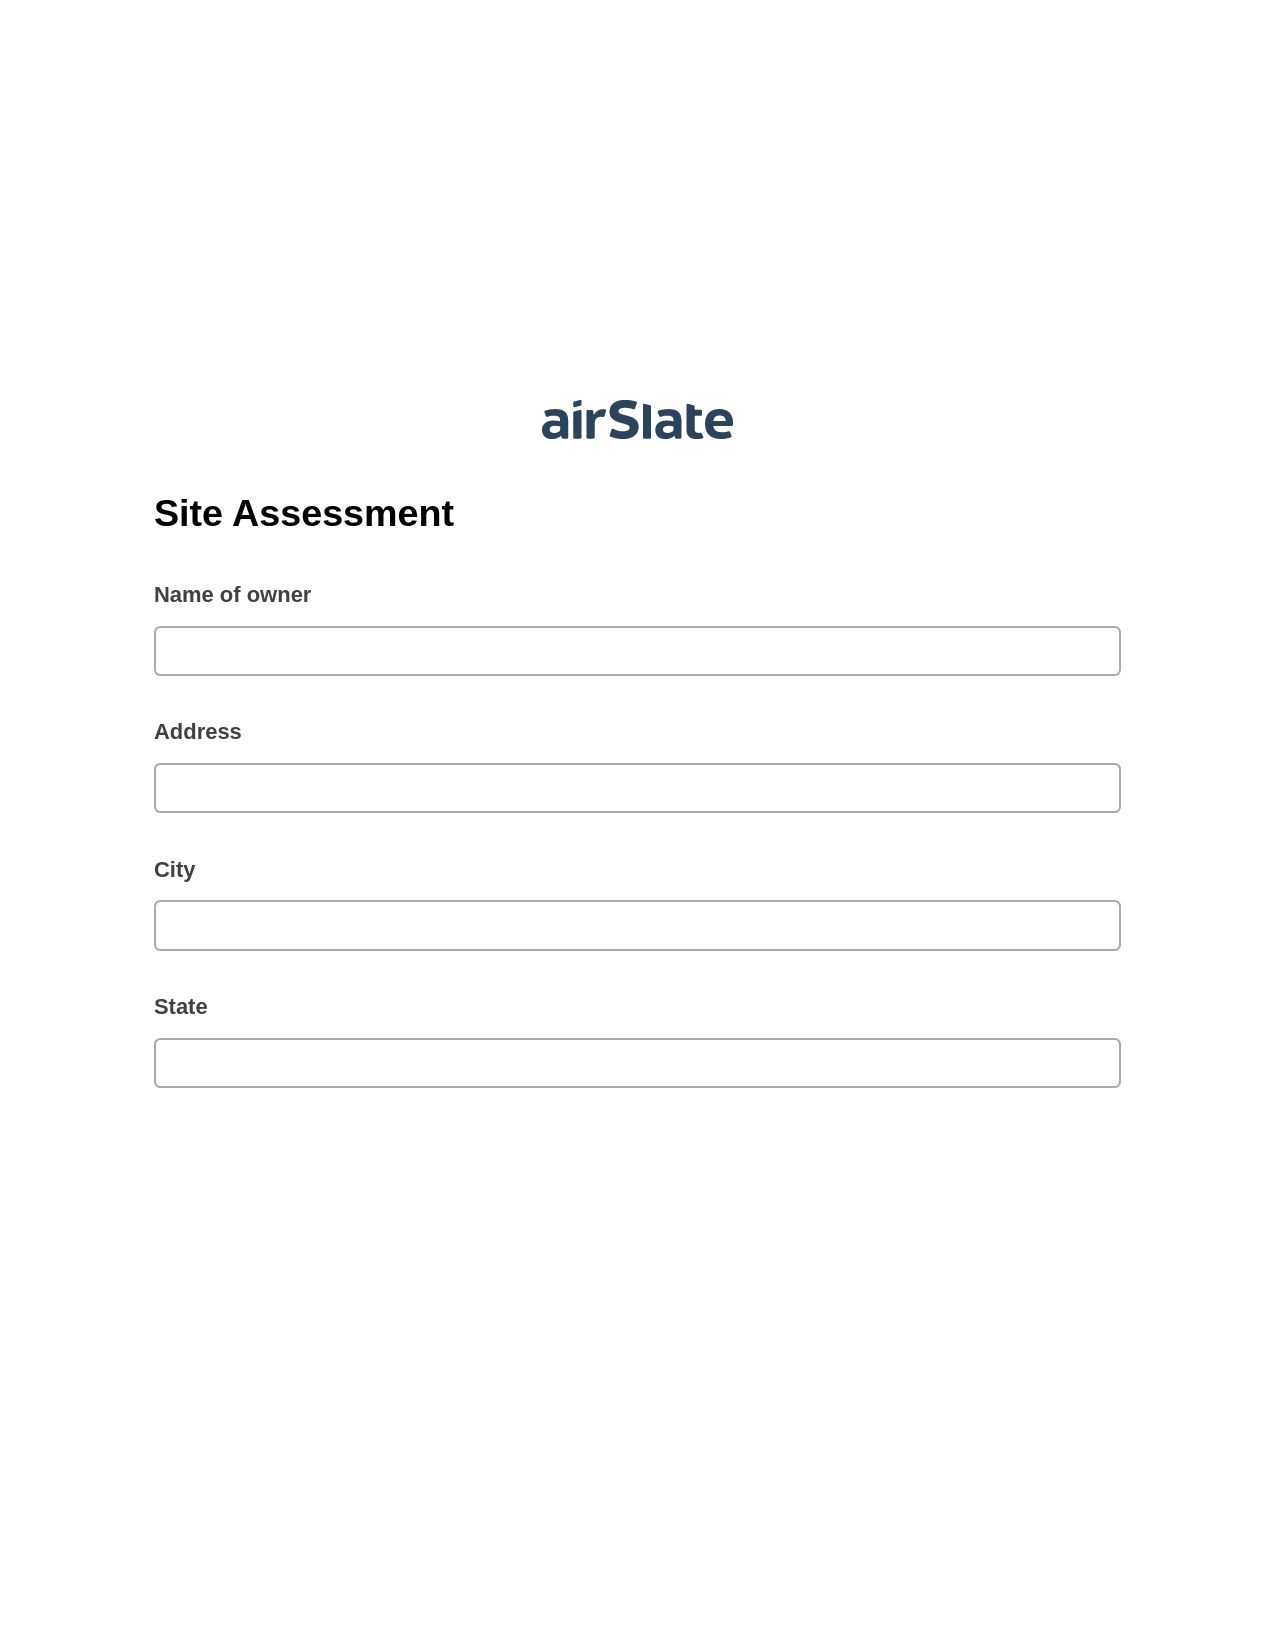 Site Assessment Pre-fill from CSV File Bot, Create Slate from another Flow Bot, Export to Smartsheet